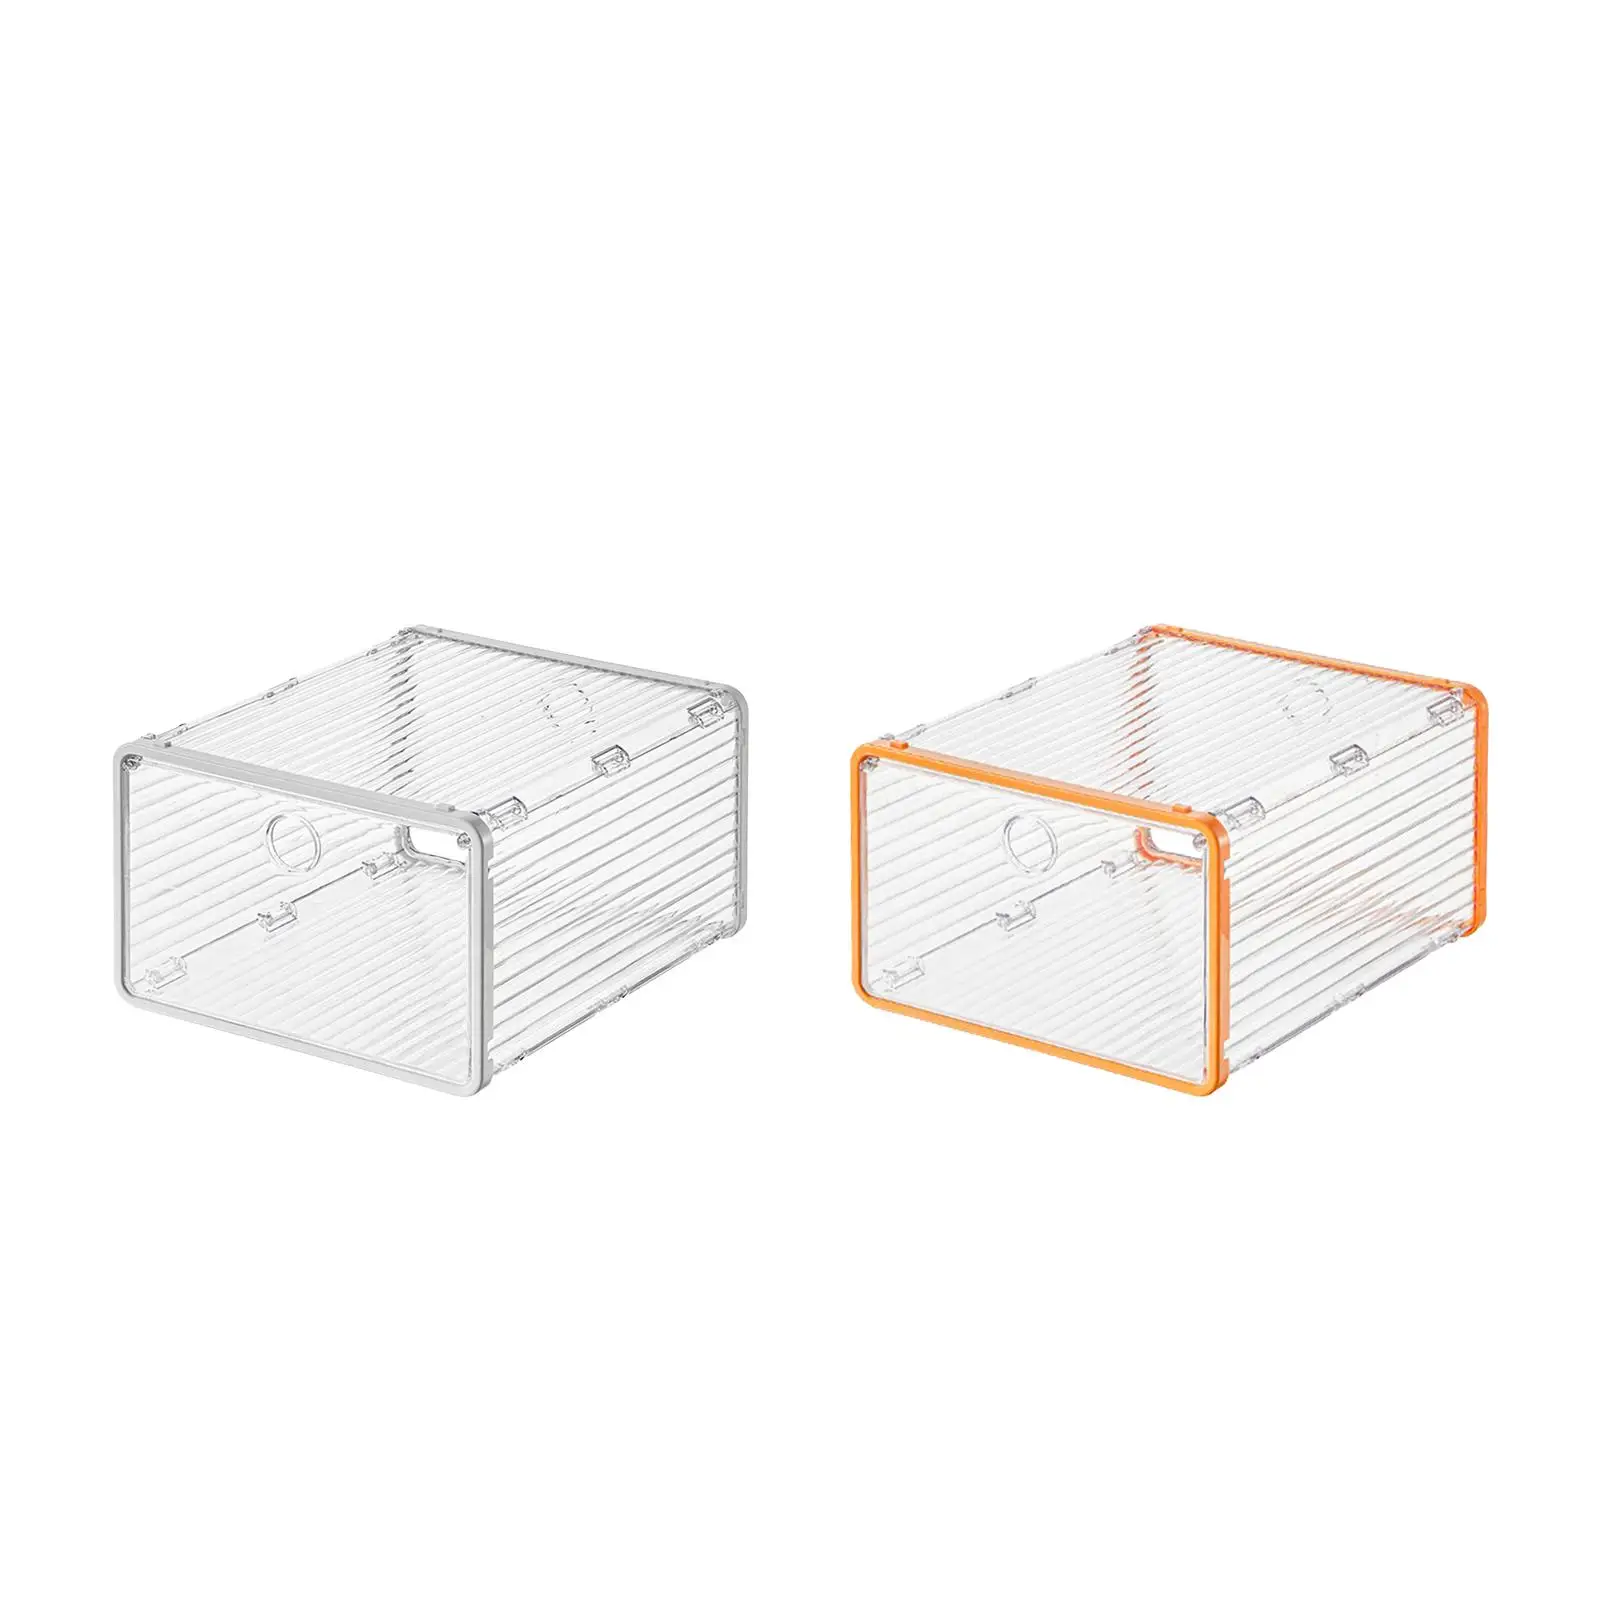 Large Shoe Storage Box Shoe Organizer Multifunction with Lids Toy Boxes Clear Container for Closet Dorm Apartment RV Laundry